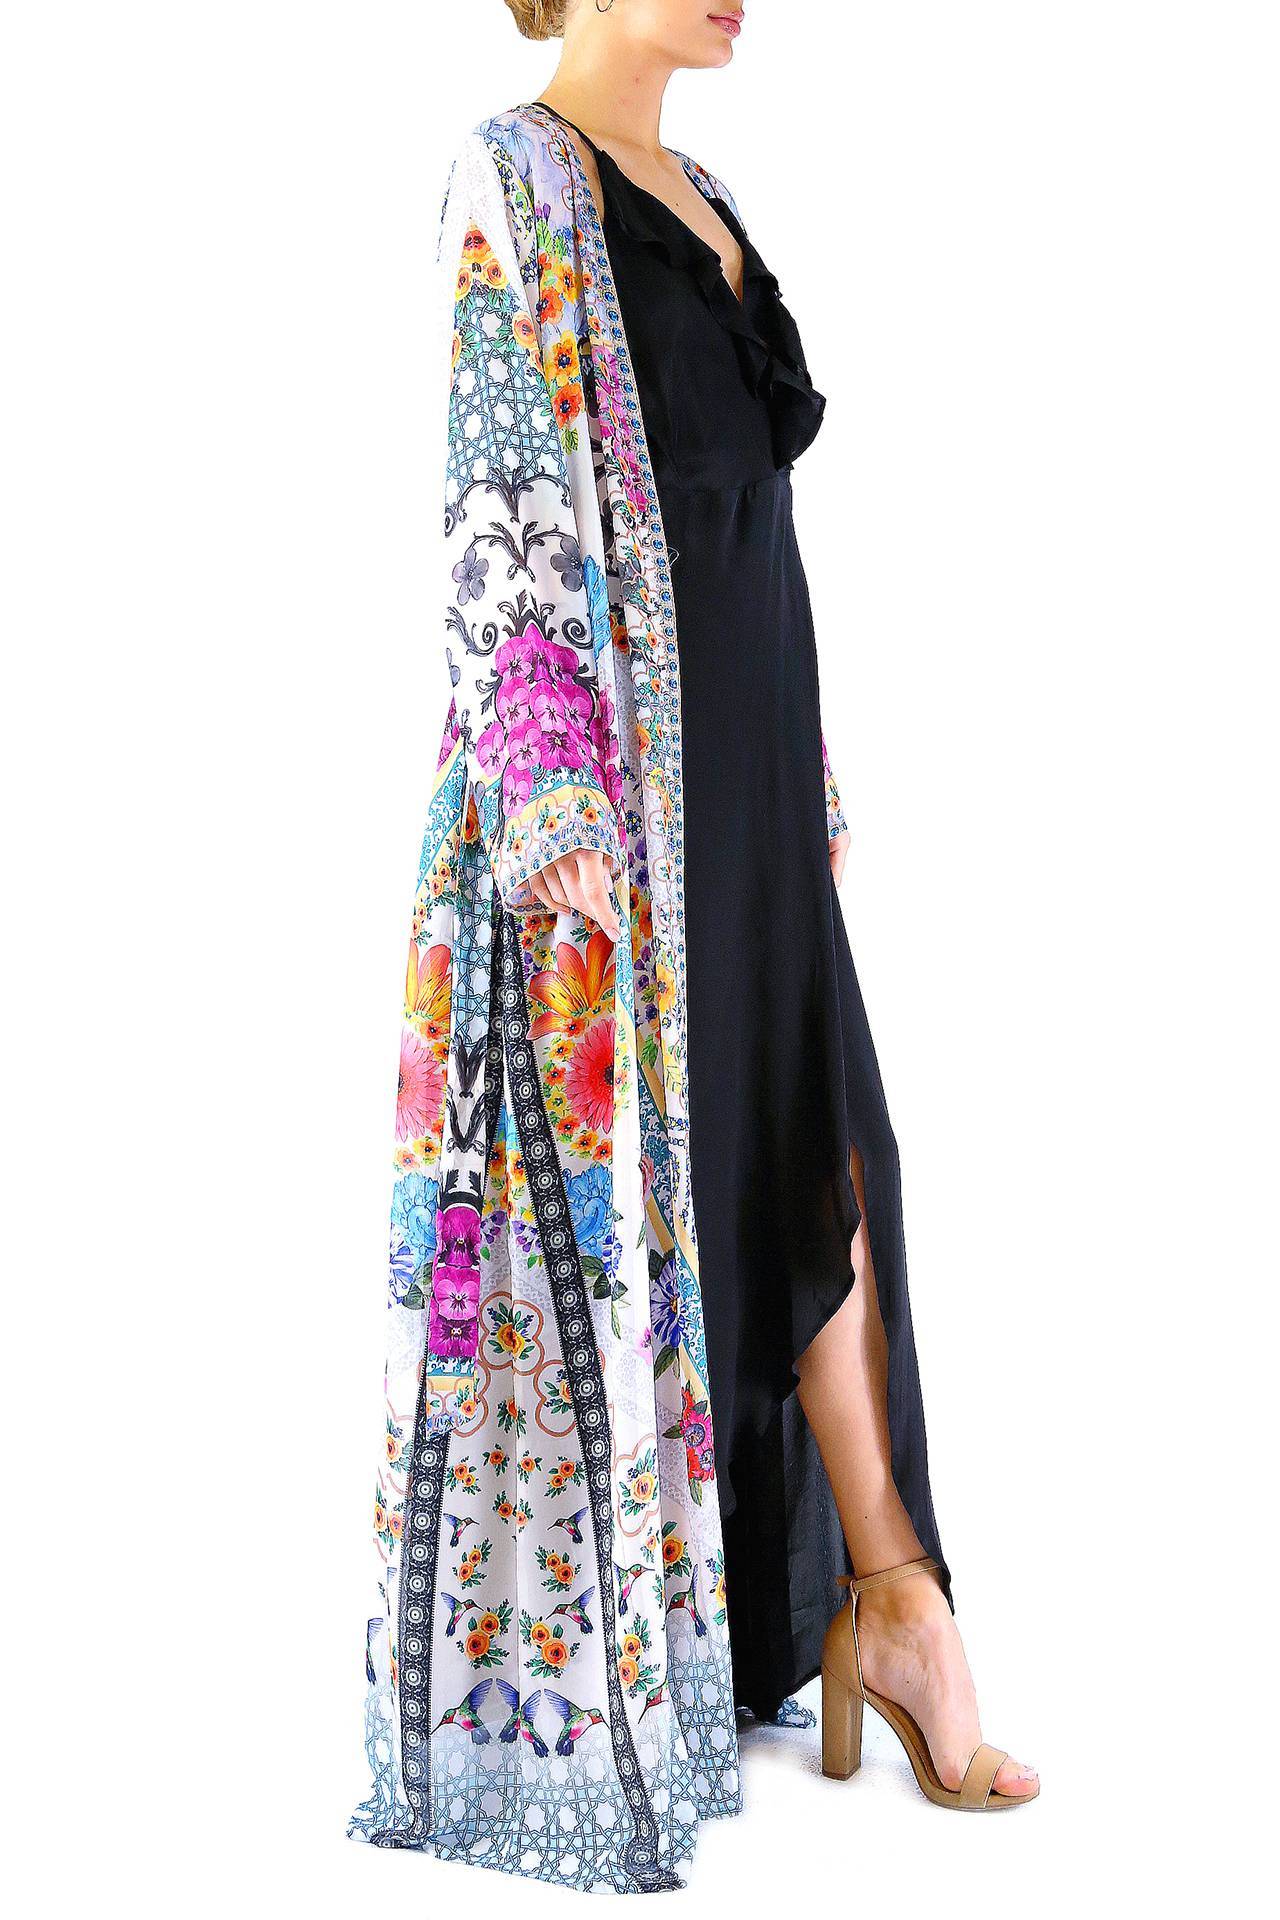 Sheer Long Duster in Floral Print - S'roushaa